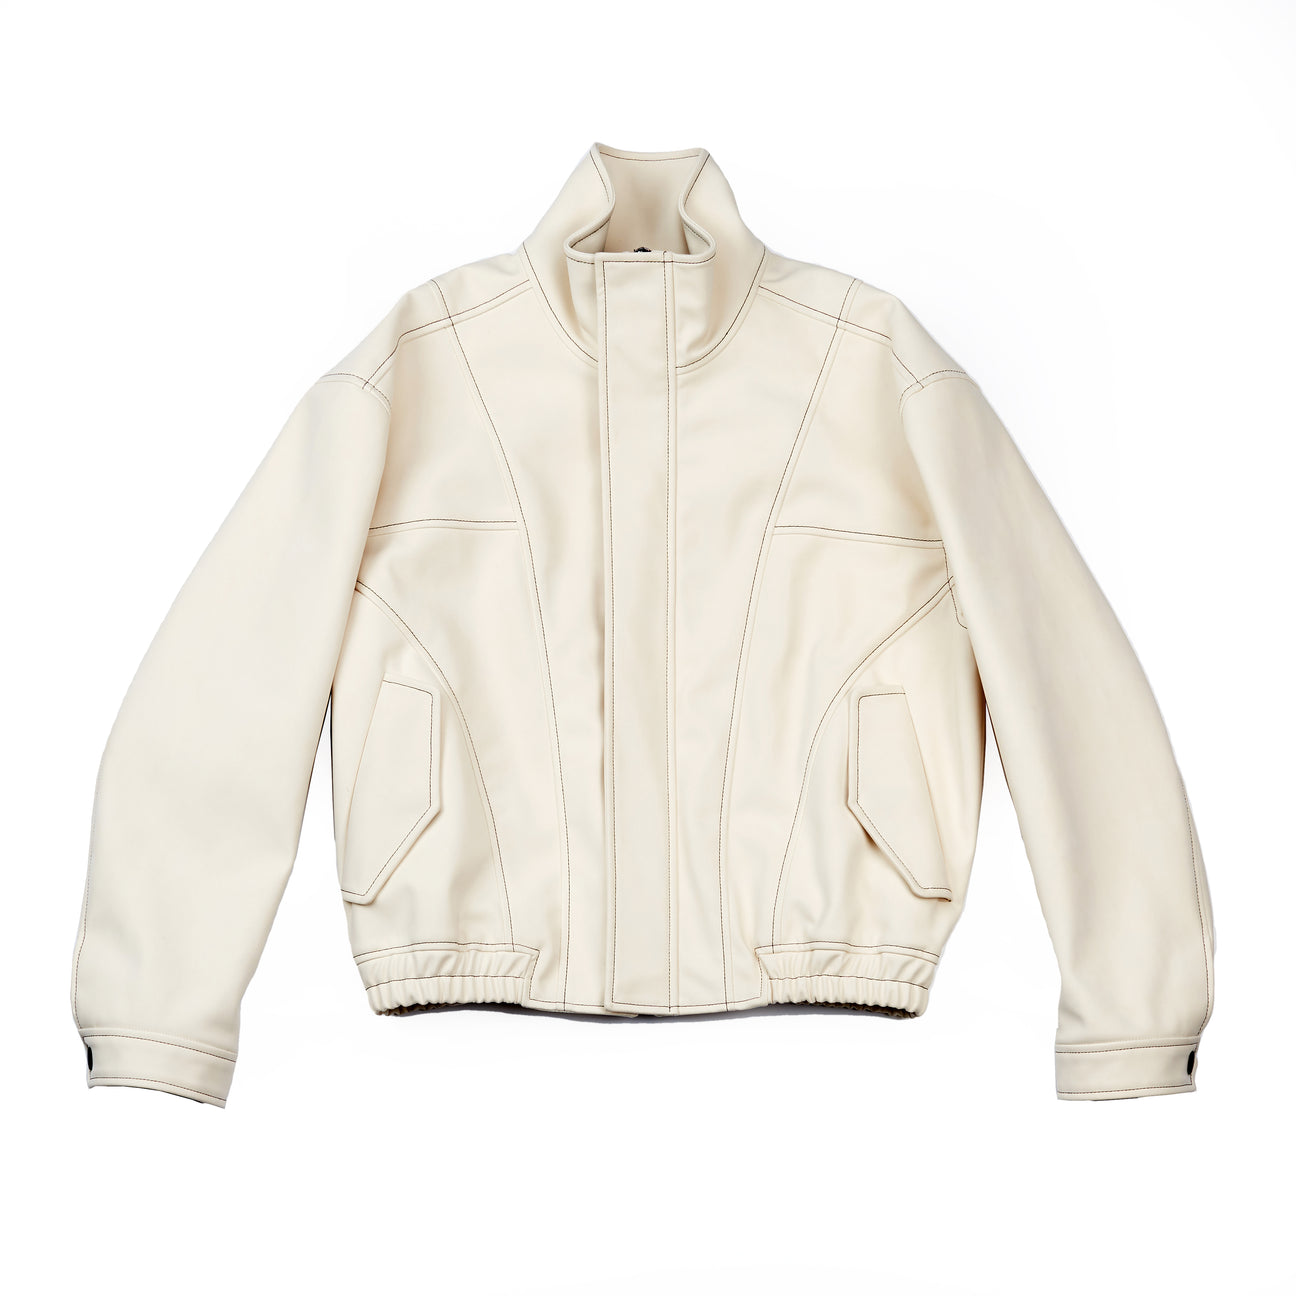 Ivory Leather Biker Jacket – The Voyager official